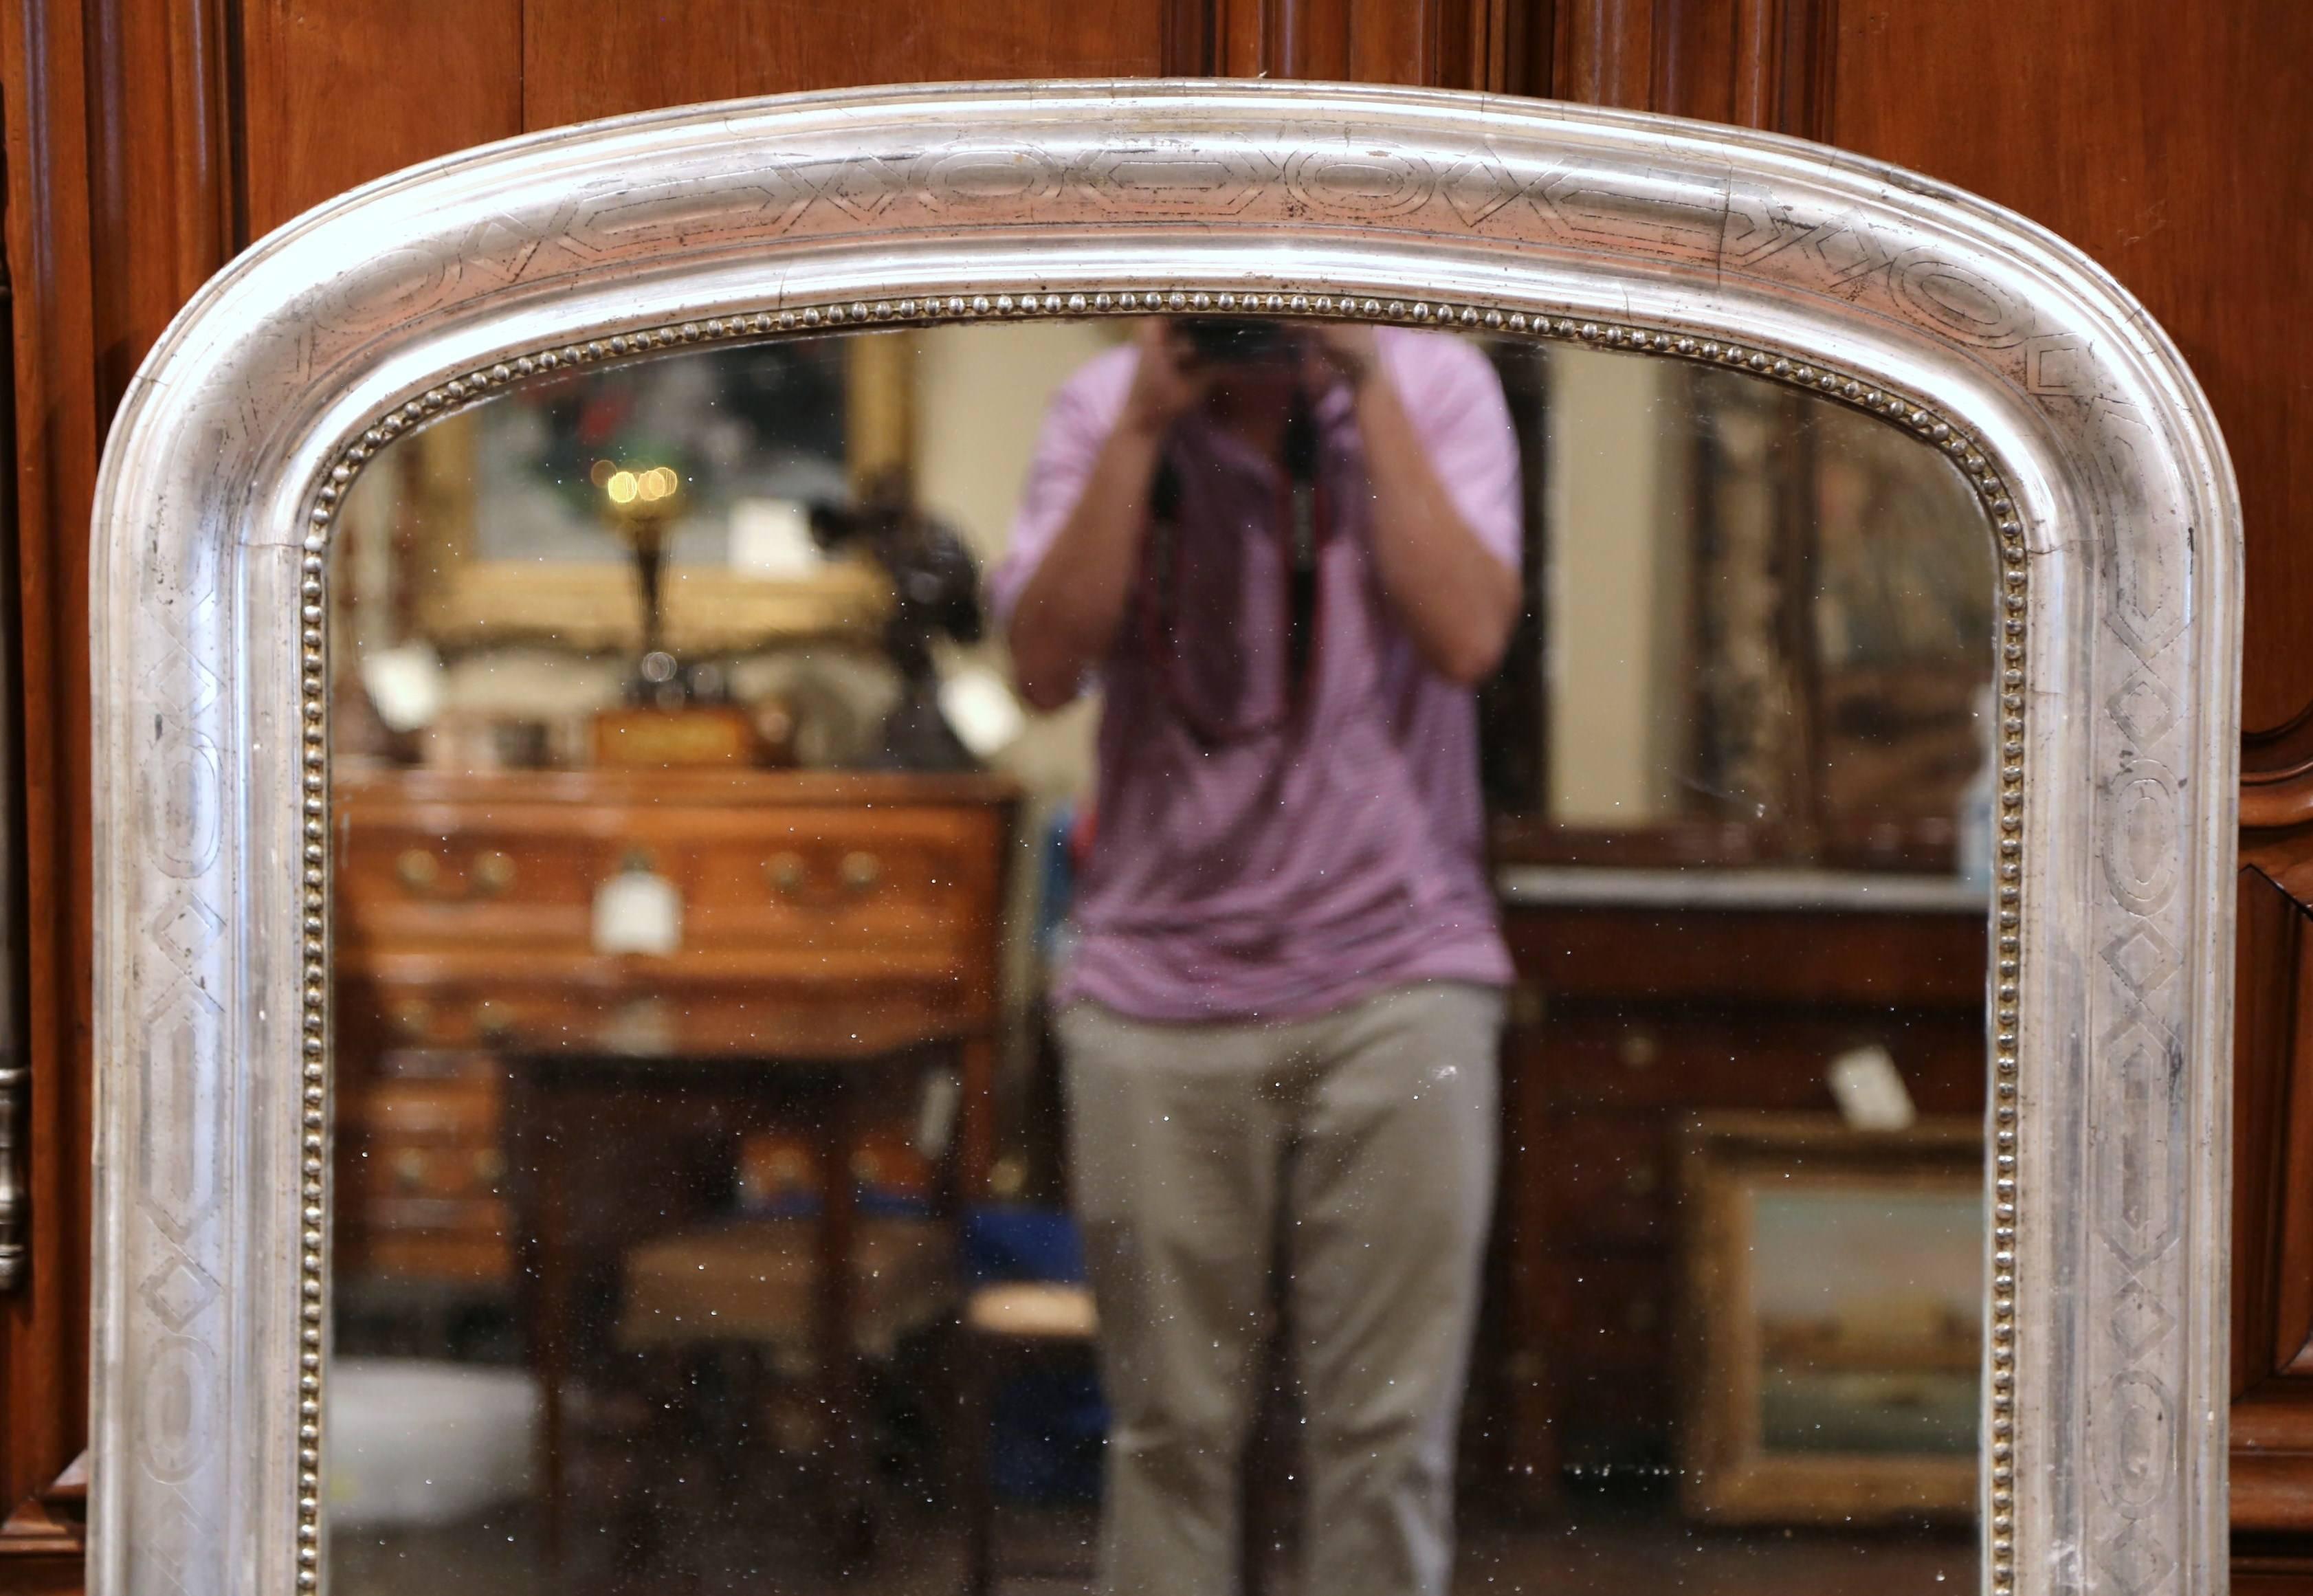 This elegant, tall antique mirror was crafted in France, circa 1860. The large rectangular wall hanging mirror with curved top, features some engraved Greek decorative design around the silver leaf frame. The traditional piece is in excellent